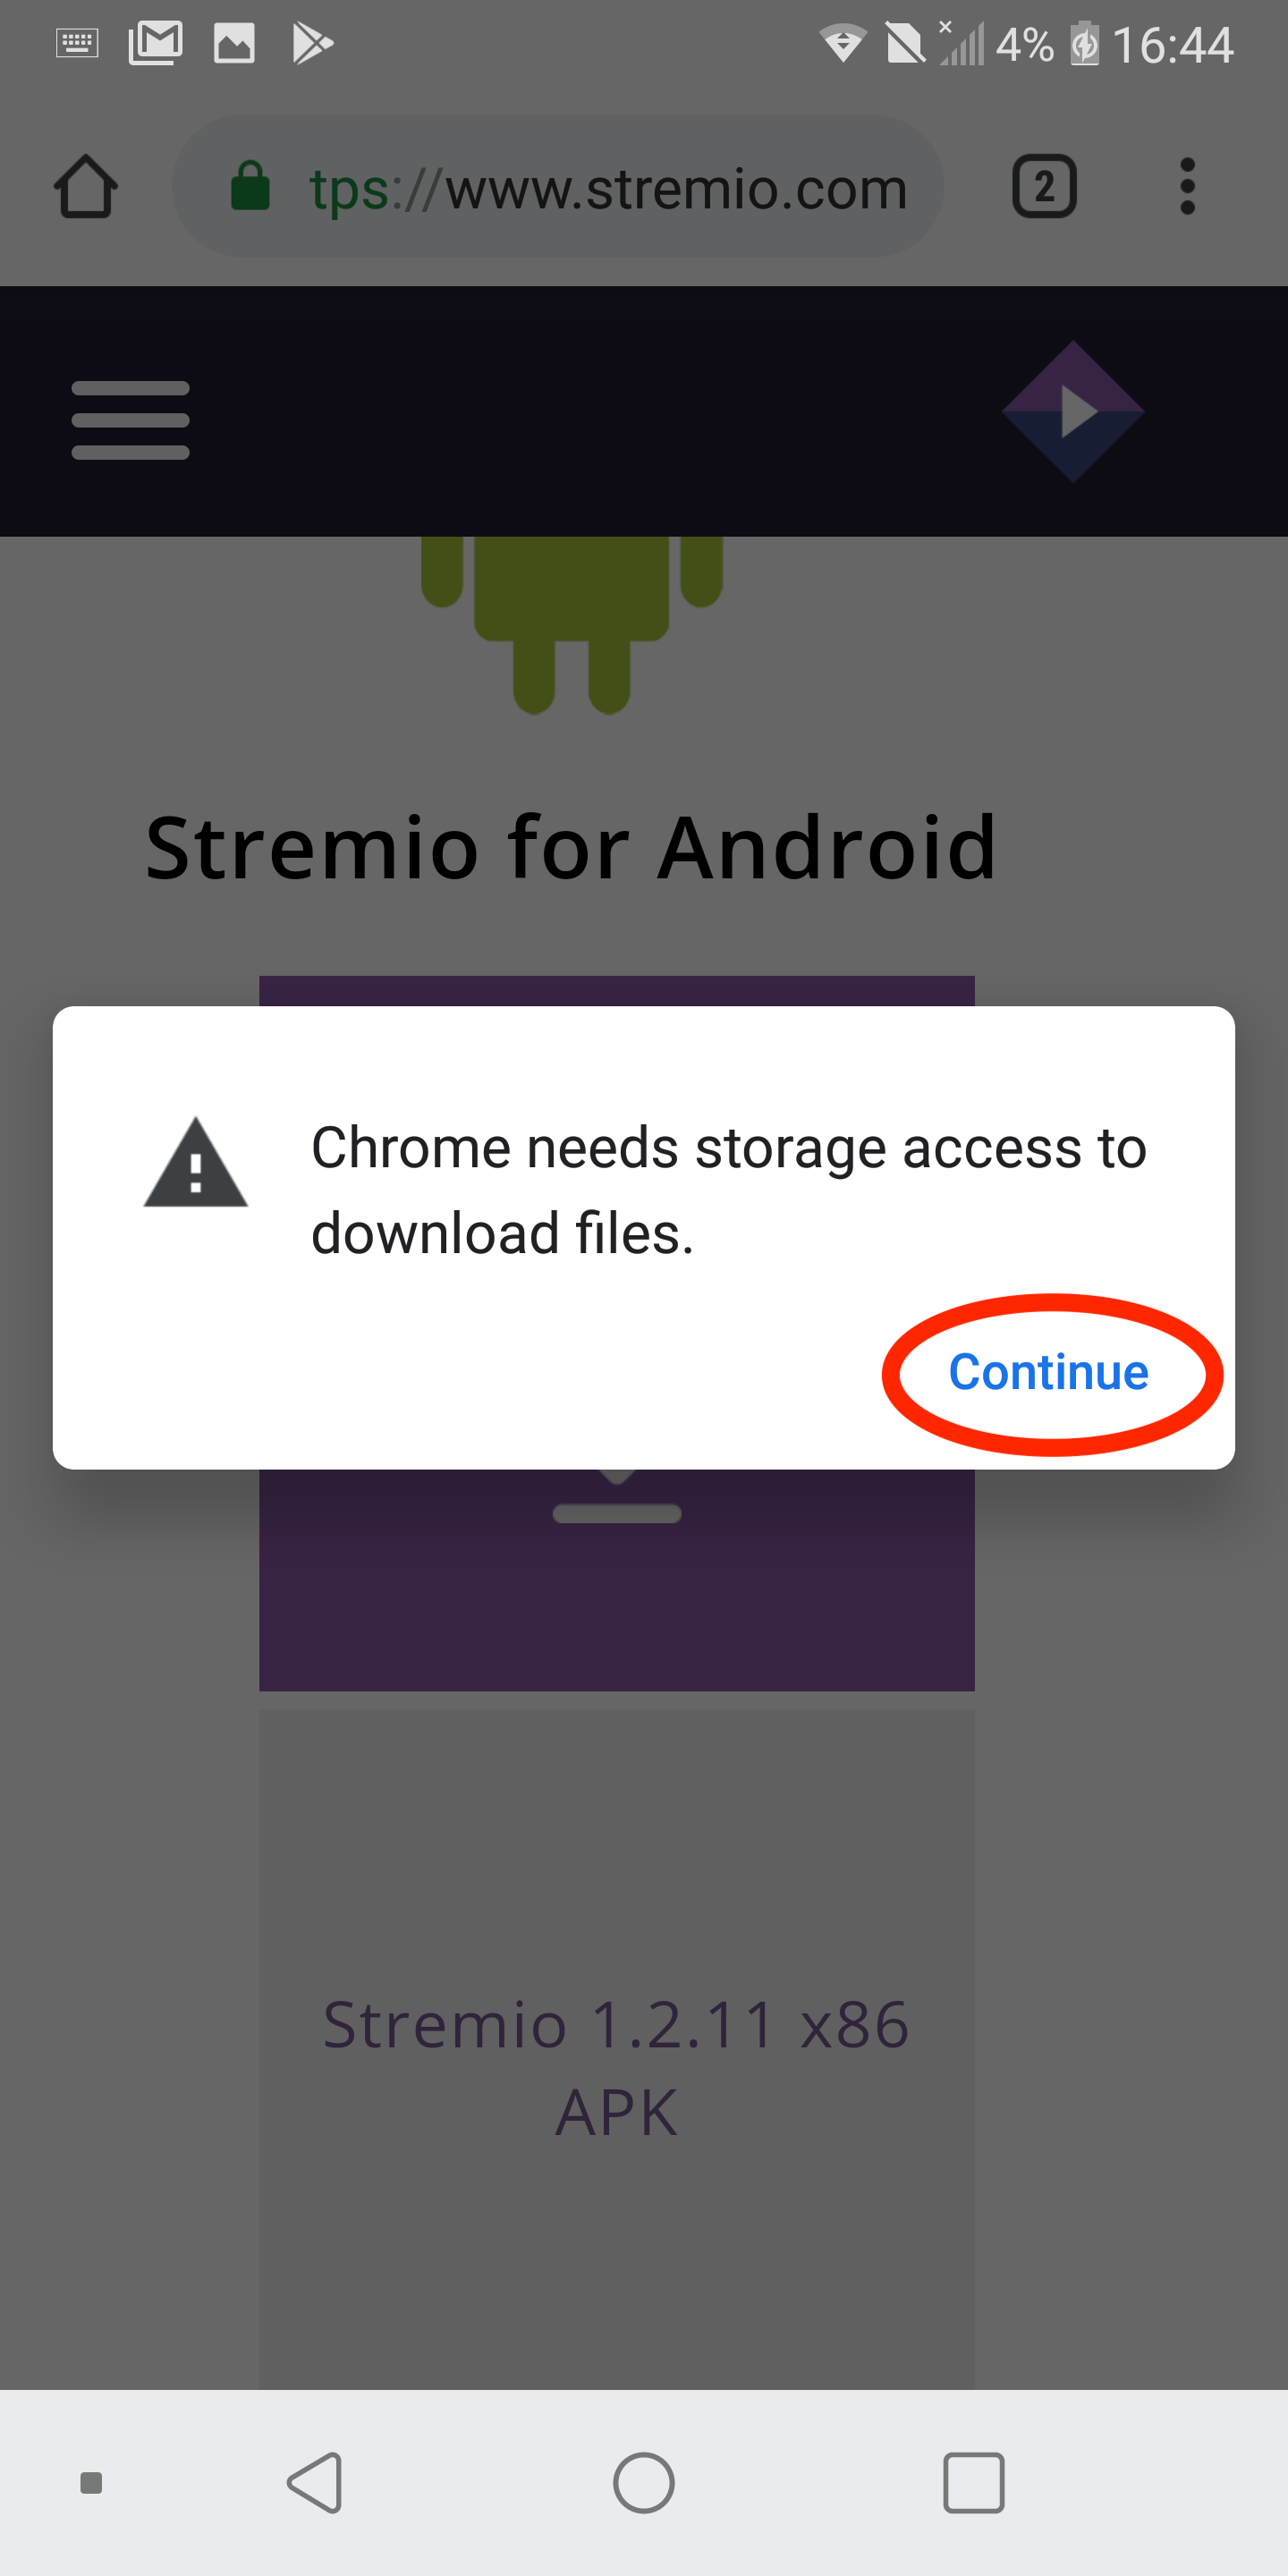 How to install the Stremio APK on Android